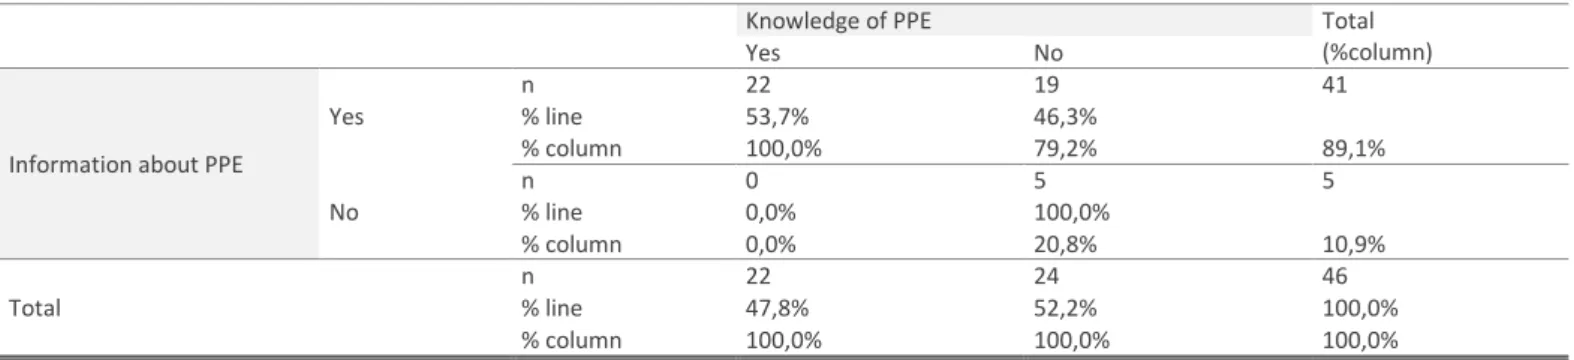 Table 3: Relation between Information of PPE and Knowledge of PPE presented in the questionnaire 